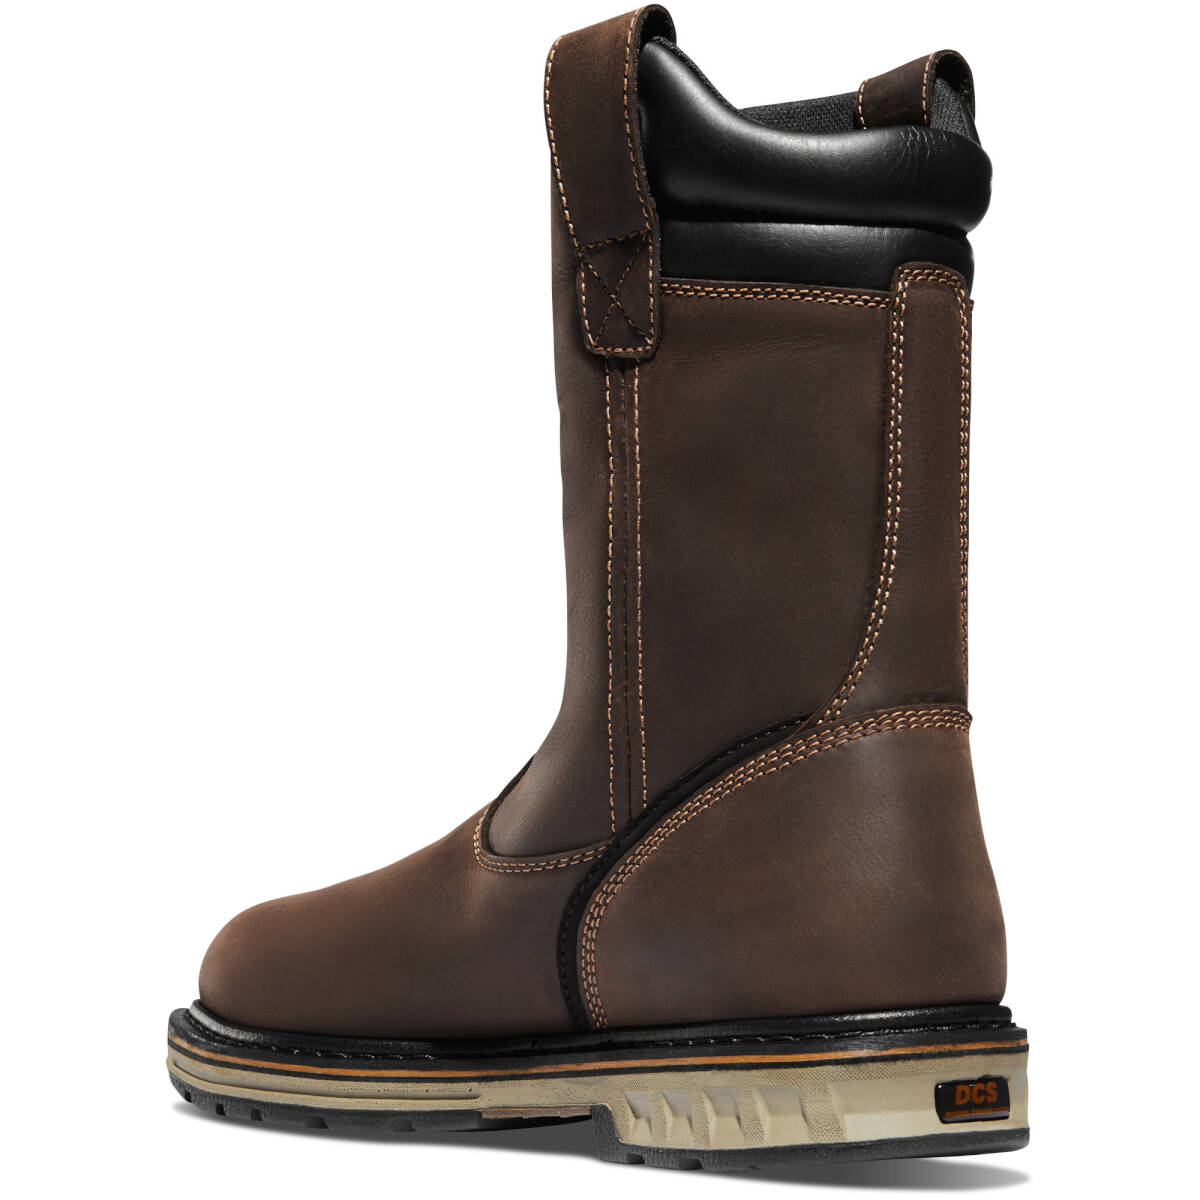 Danner 12561 Size 10d 11-Inch Brown Wellington Steel Toe Boots at ...